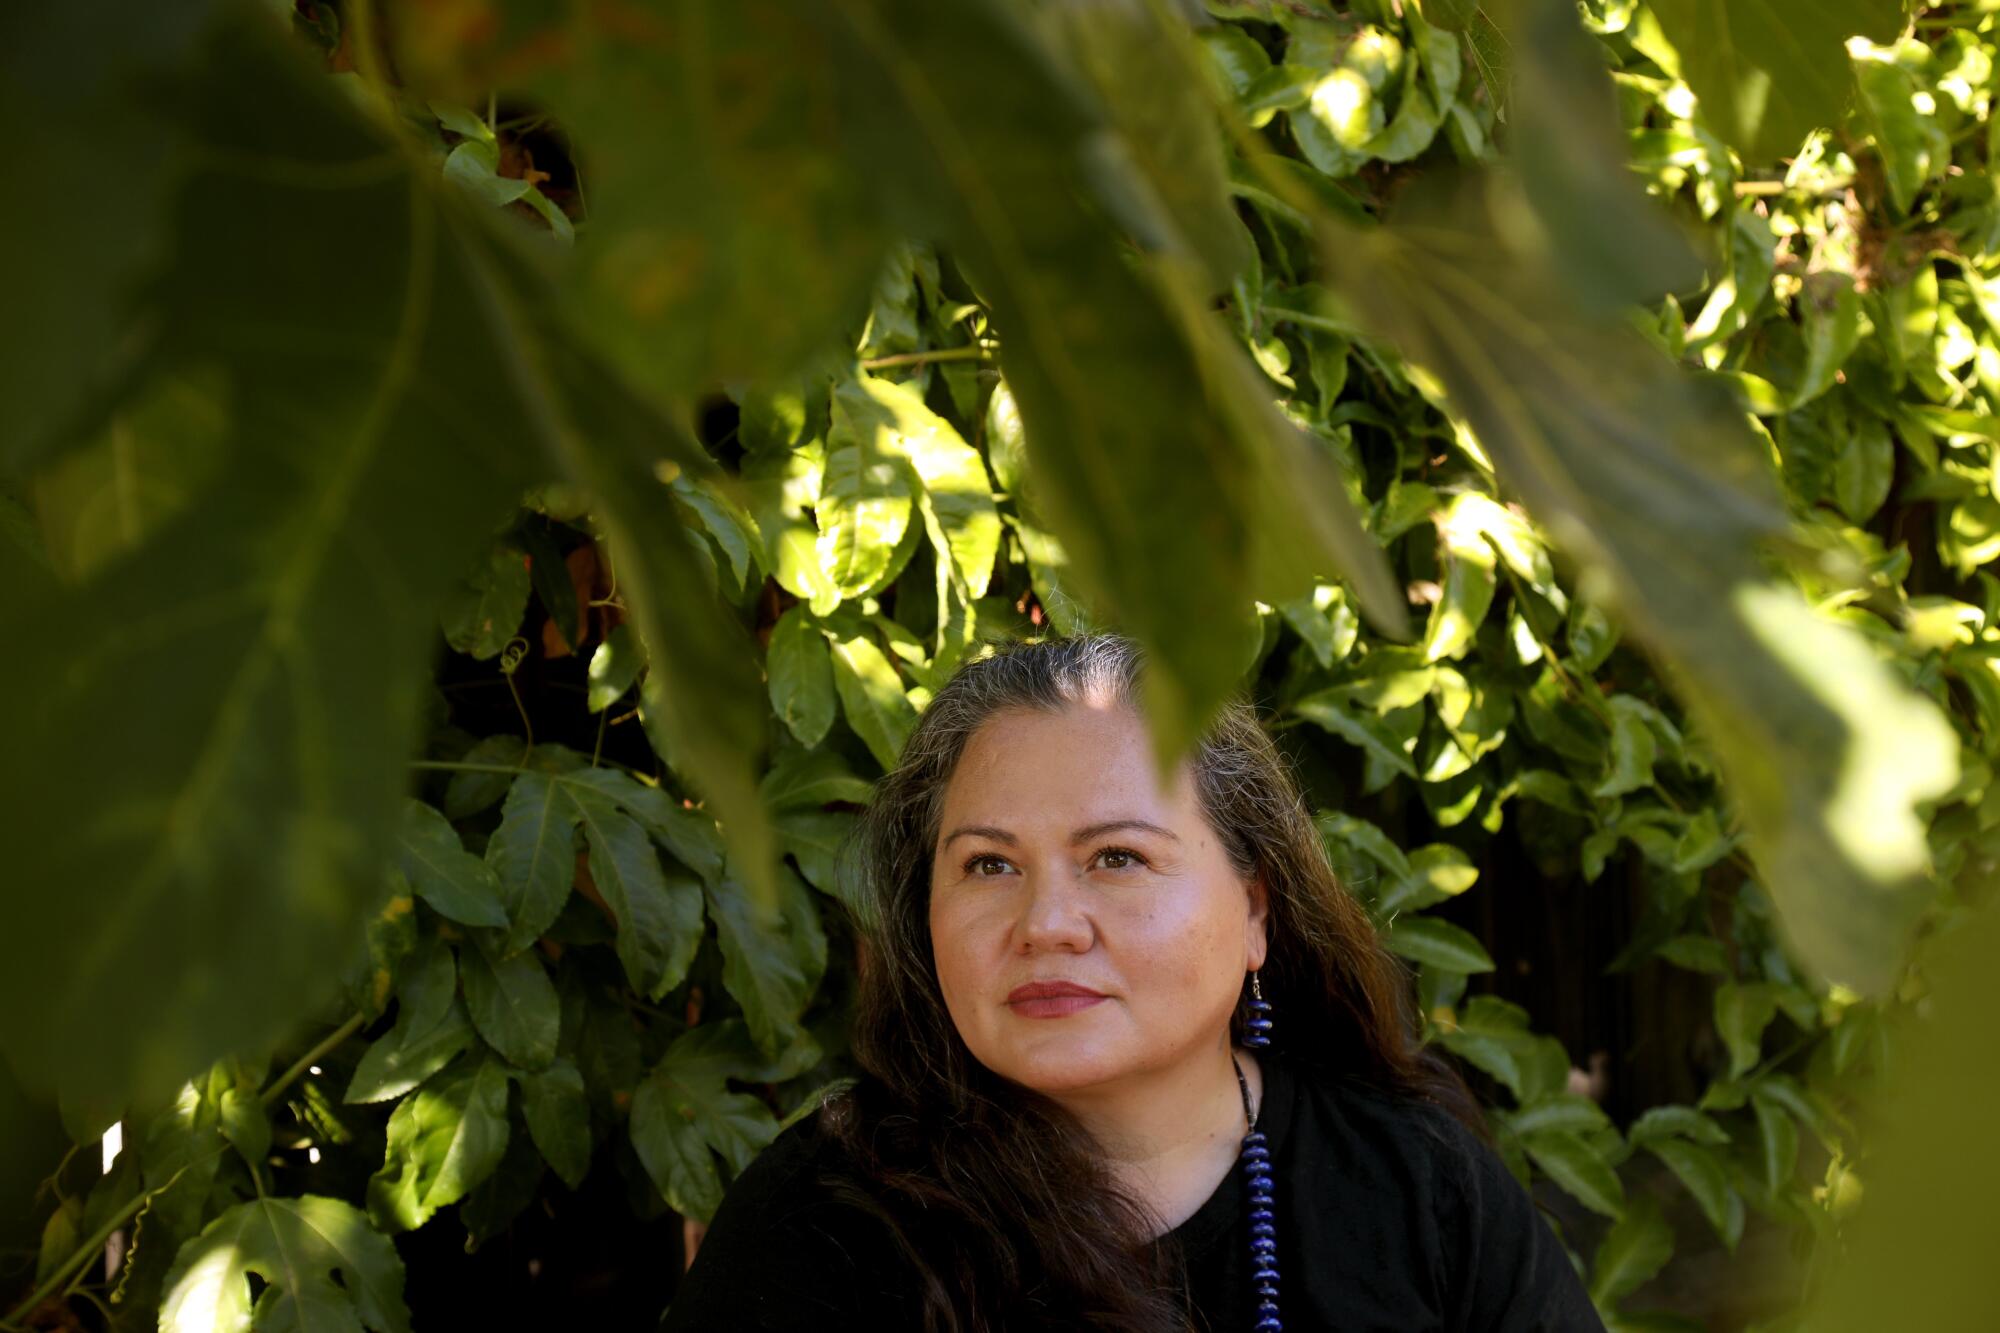 A woman with dark hair, in dark clothes, is surrounded by green plants 